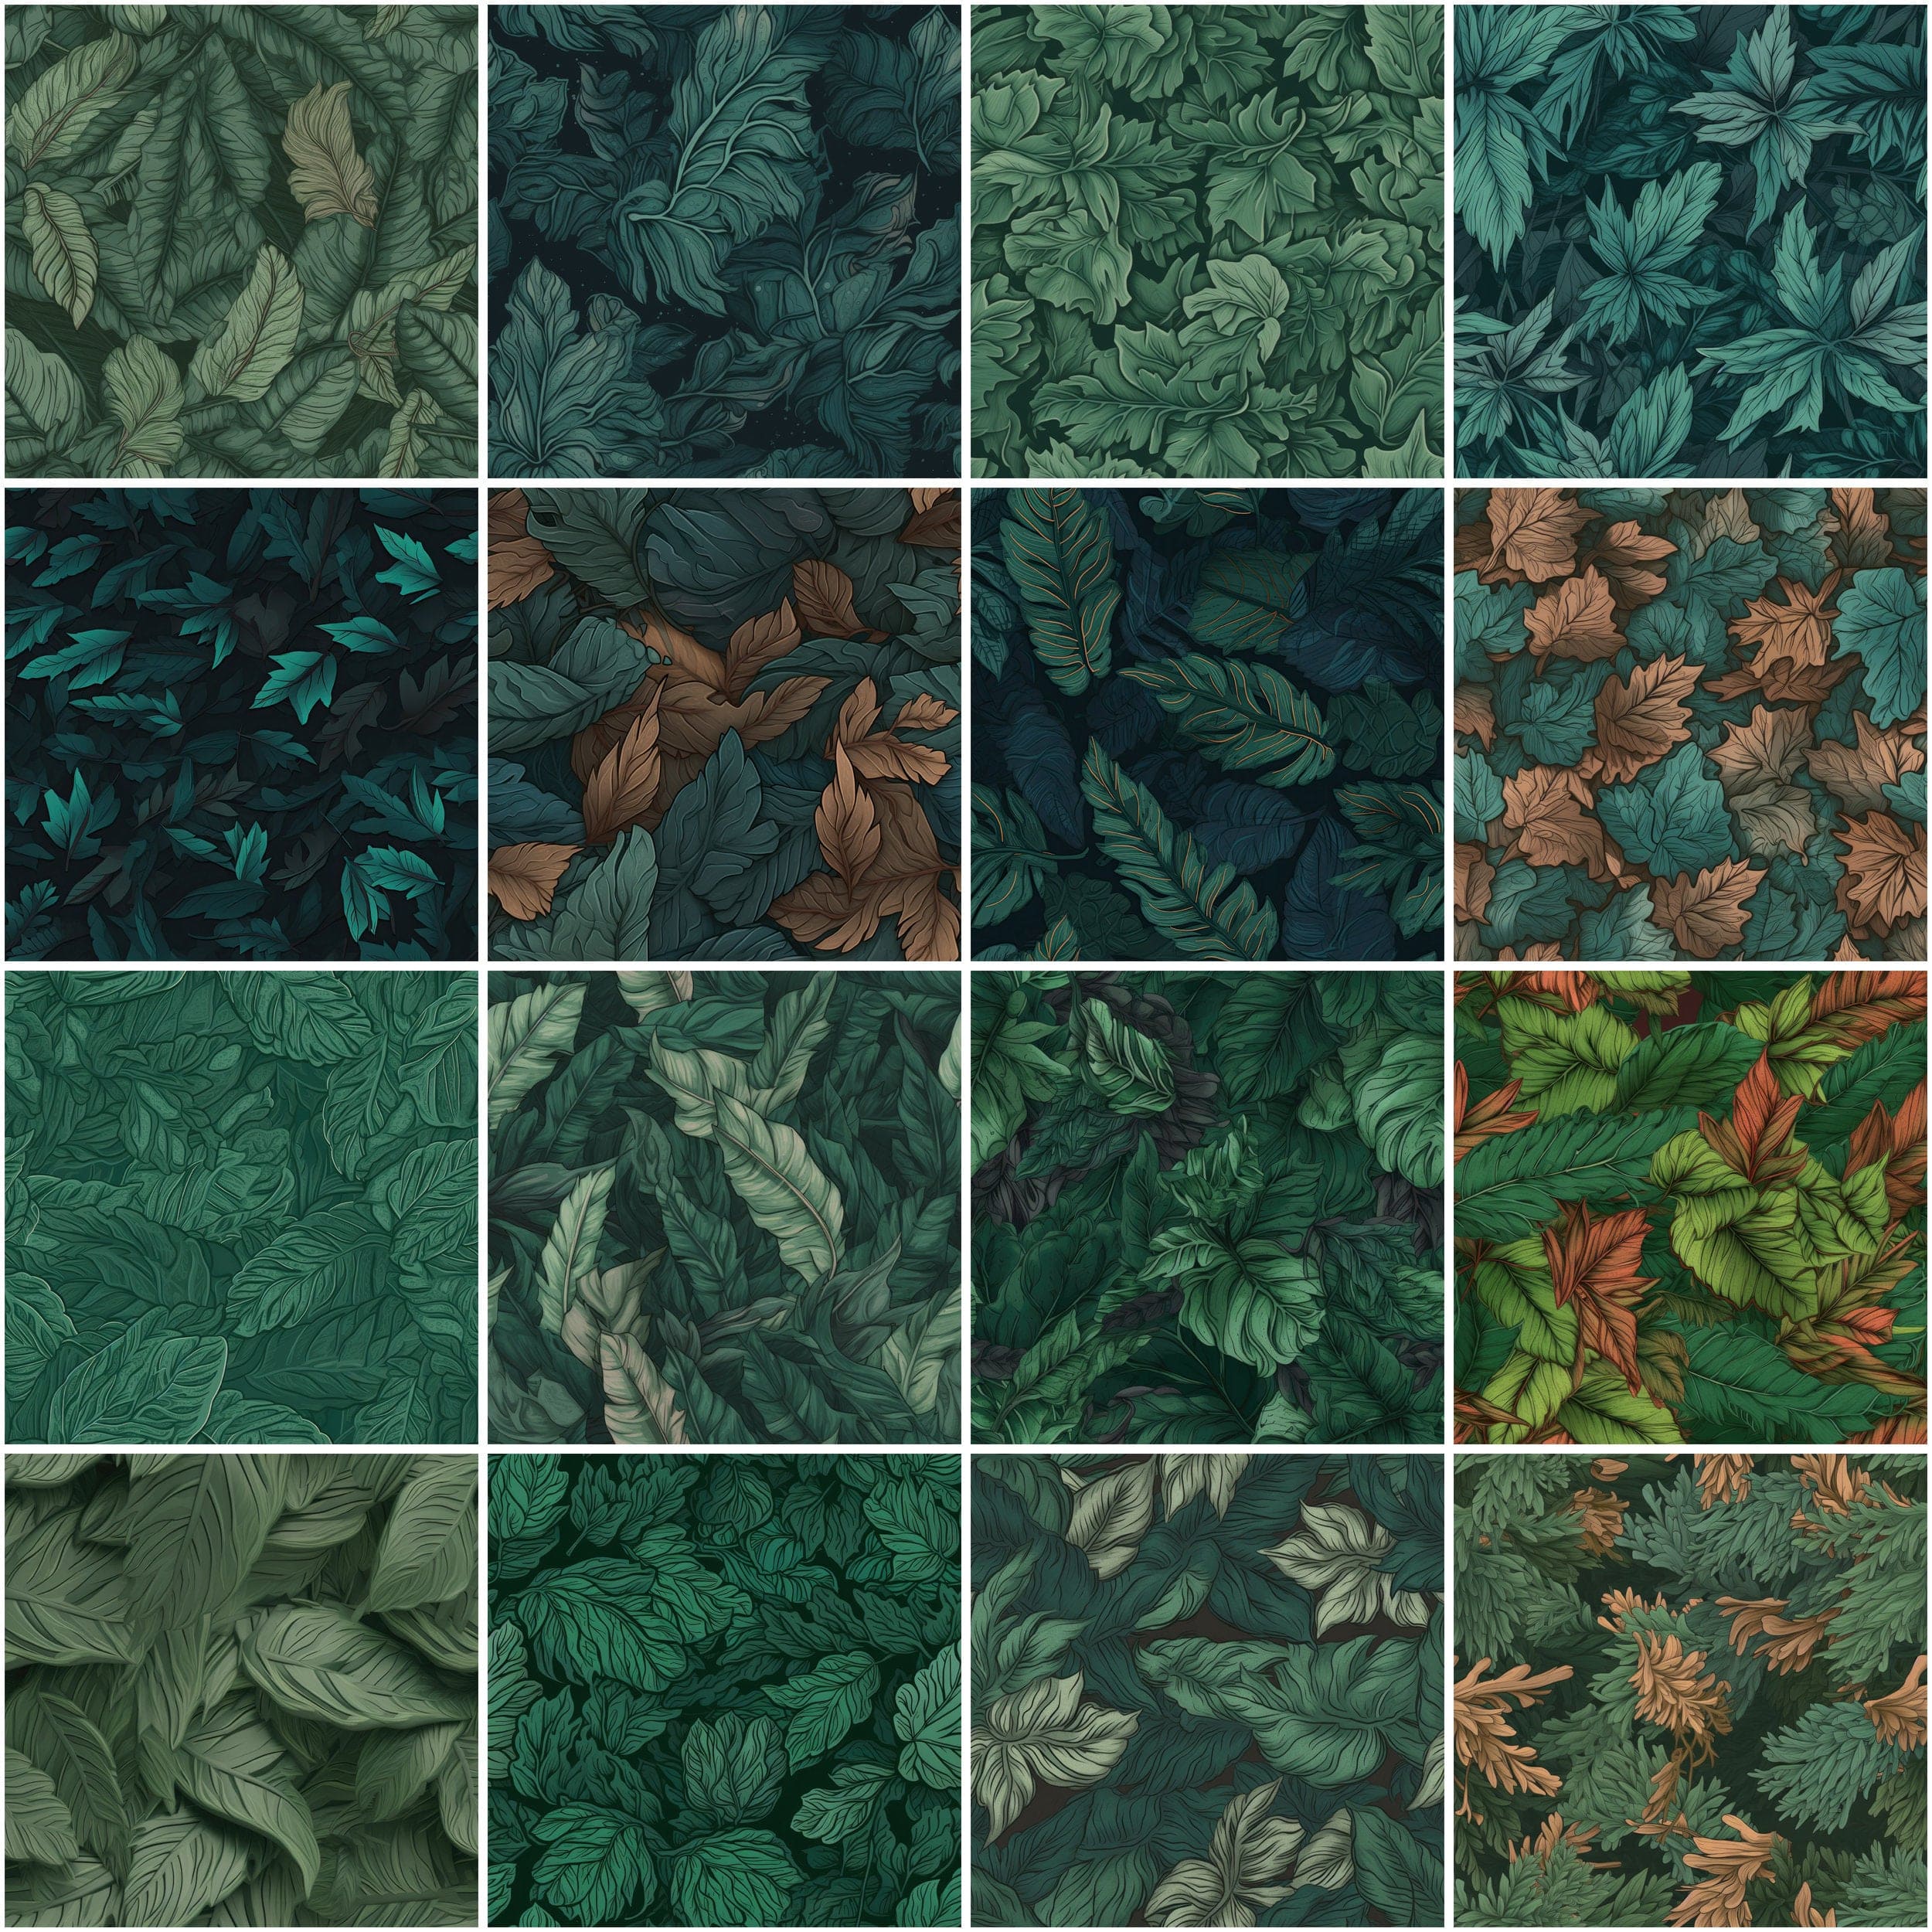 110 Foliage & Leaves Seamless Patterns Bundle - Digital Download for Design Projects, Scrapbooking, Wrapping, Invitations - Commercial use Digital Download Sumobundle